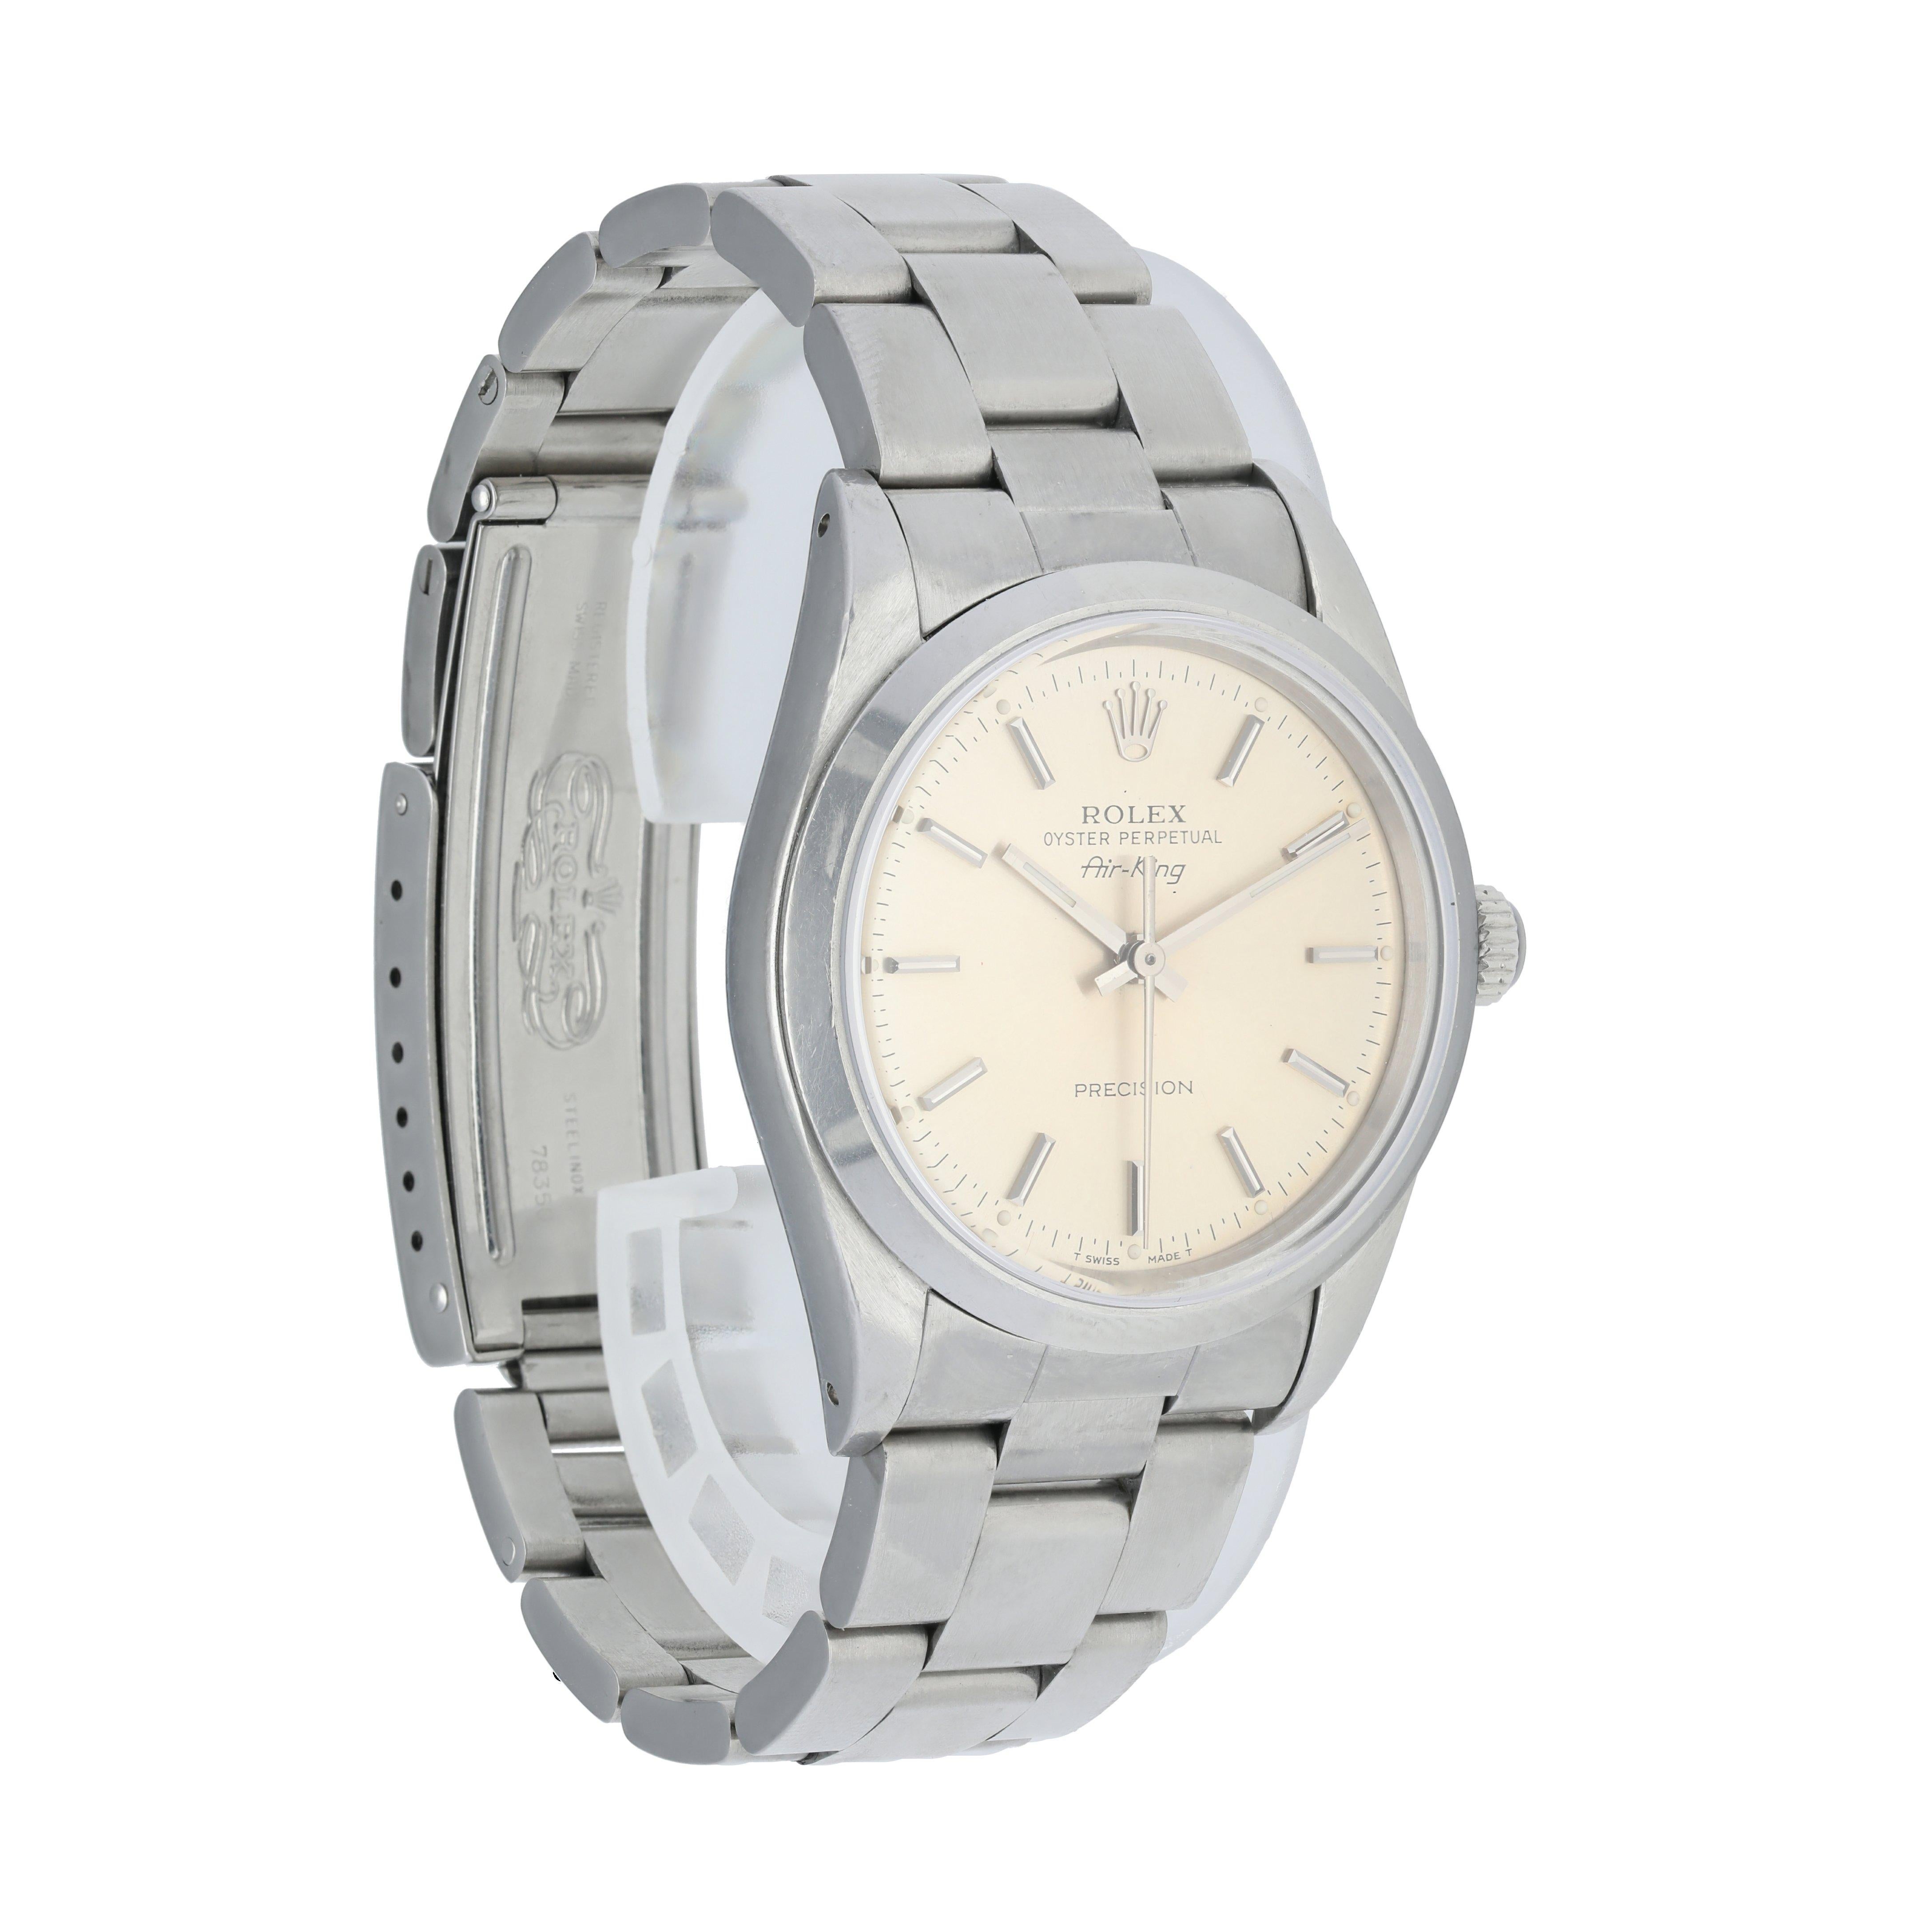 Rolex Air King 14000 Men's Watch For Sale 1